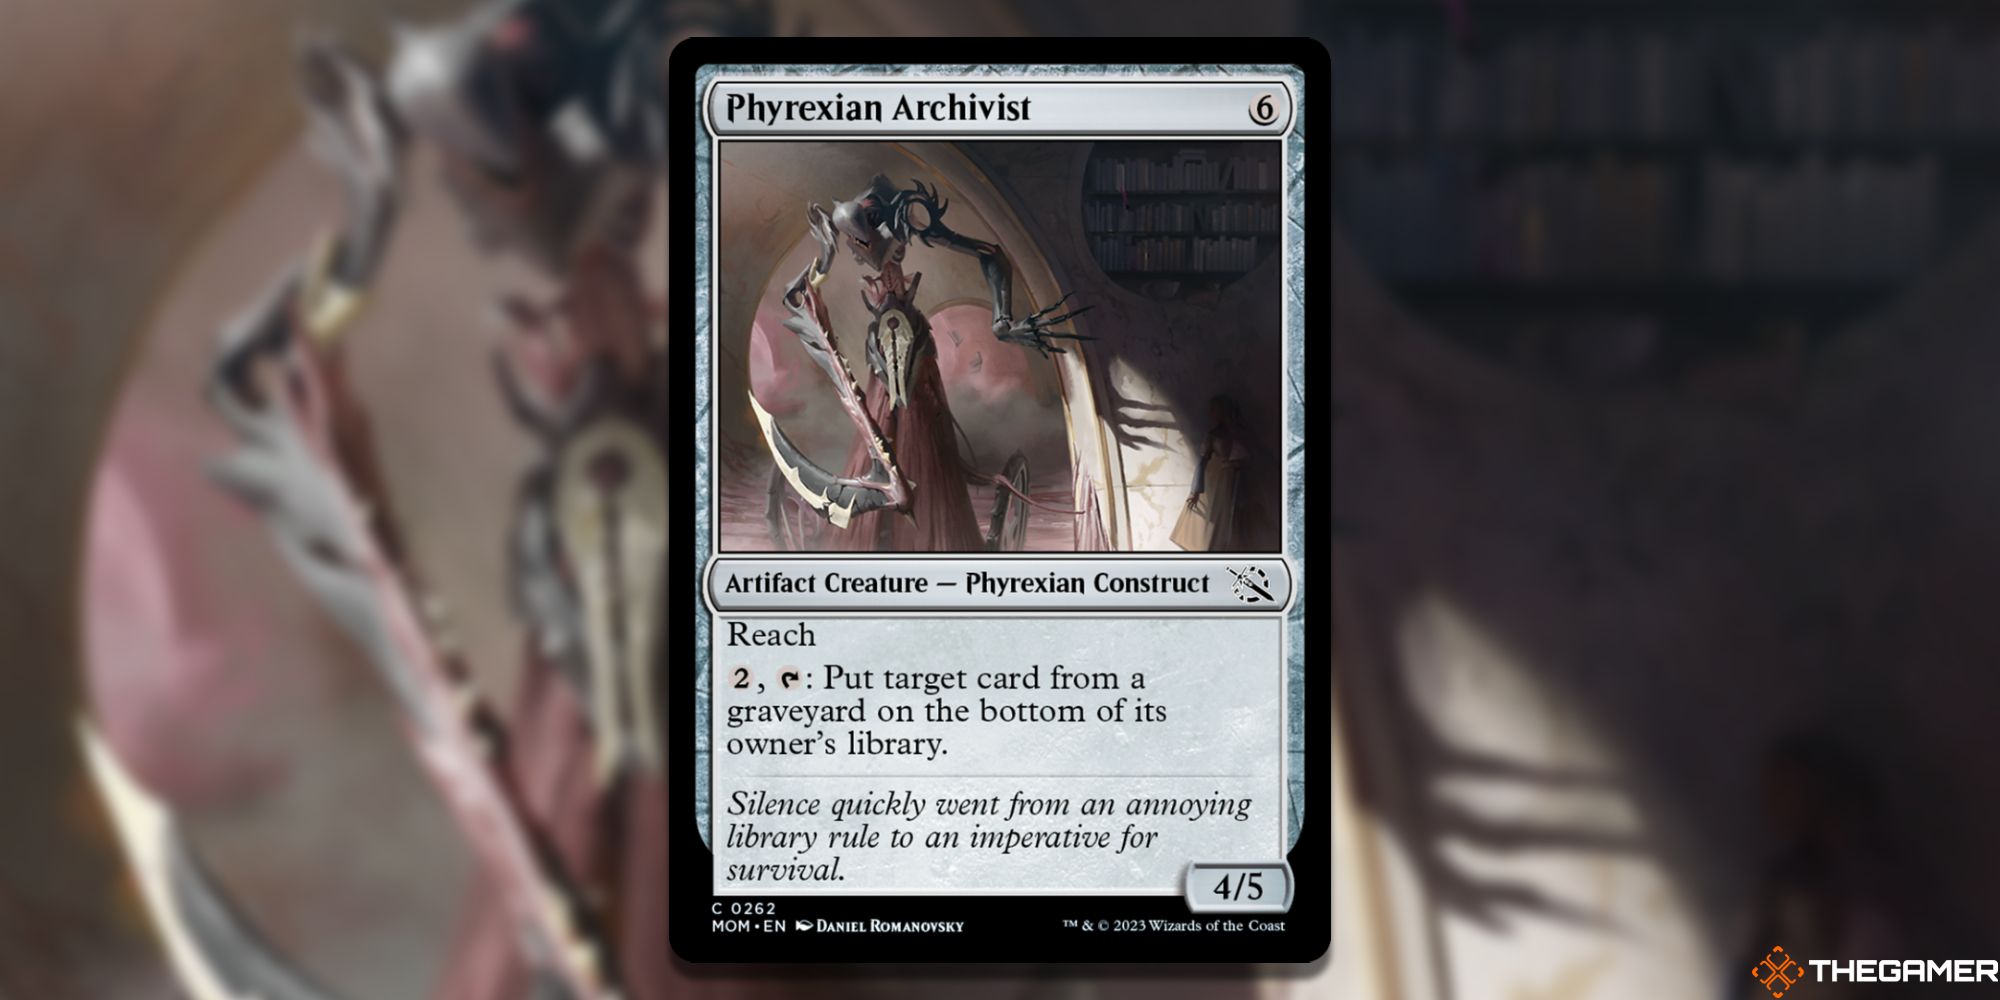 Phyrexian Archivist card image from Magic: The Gathering, with art by Daniel Romanovsky